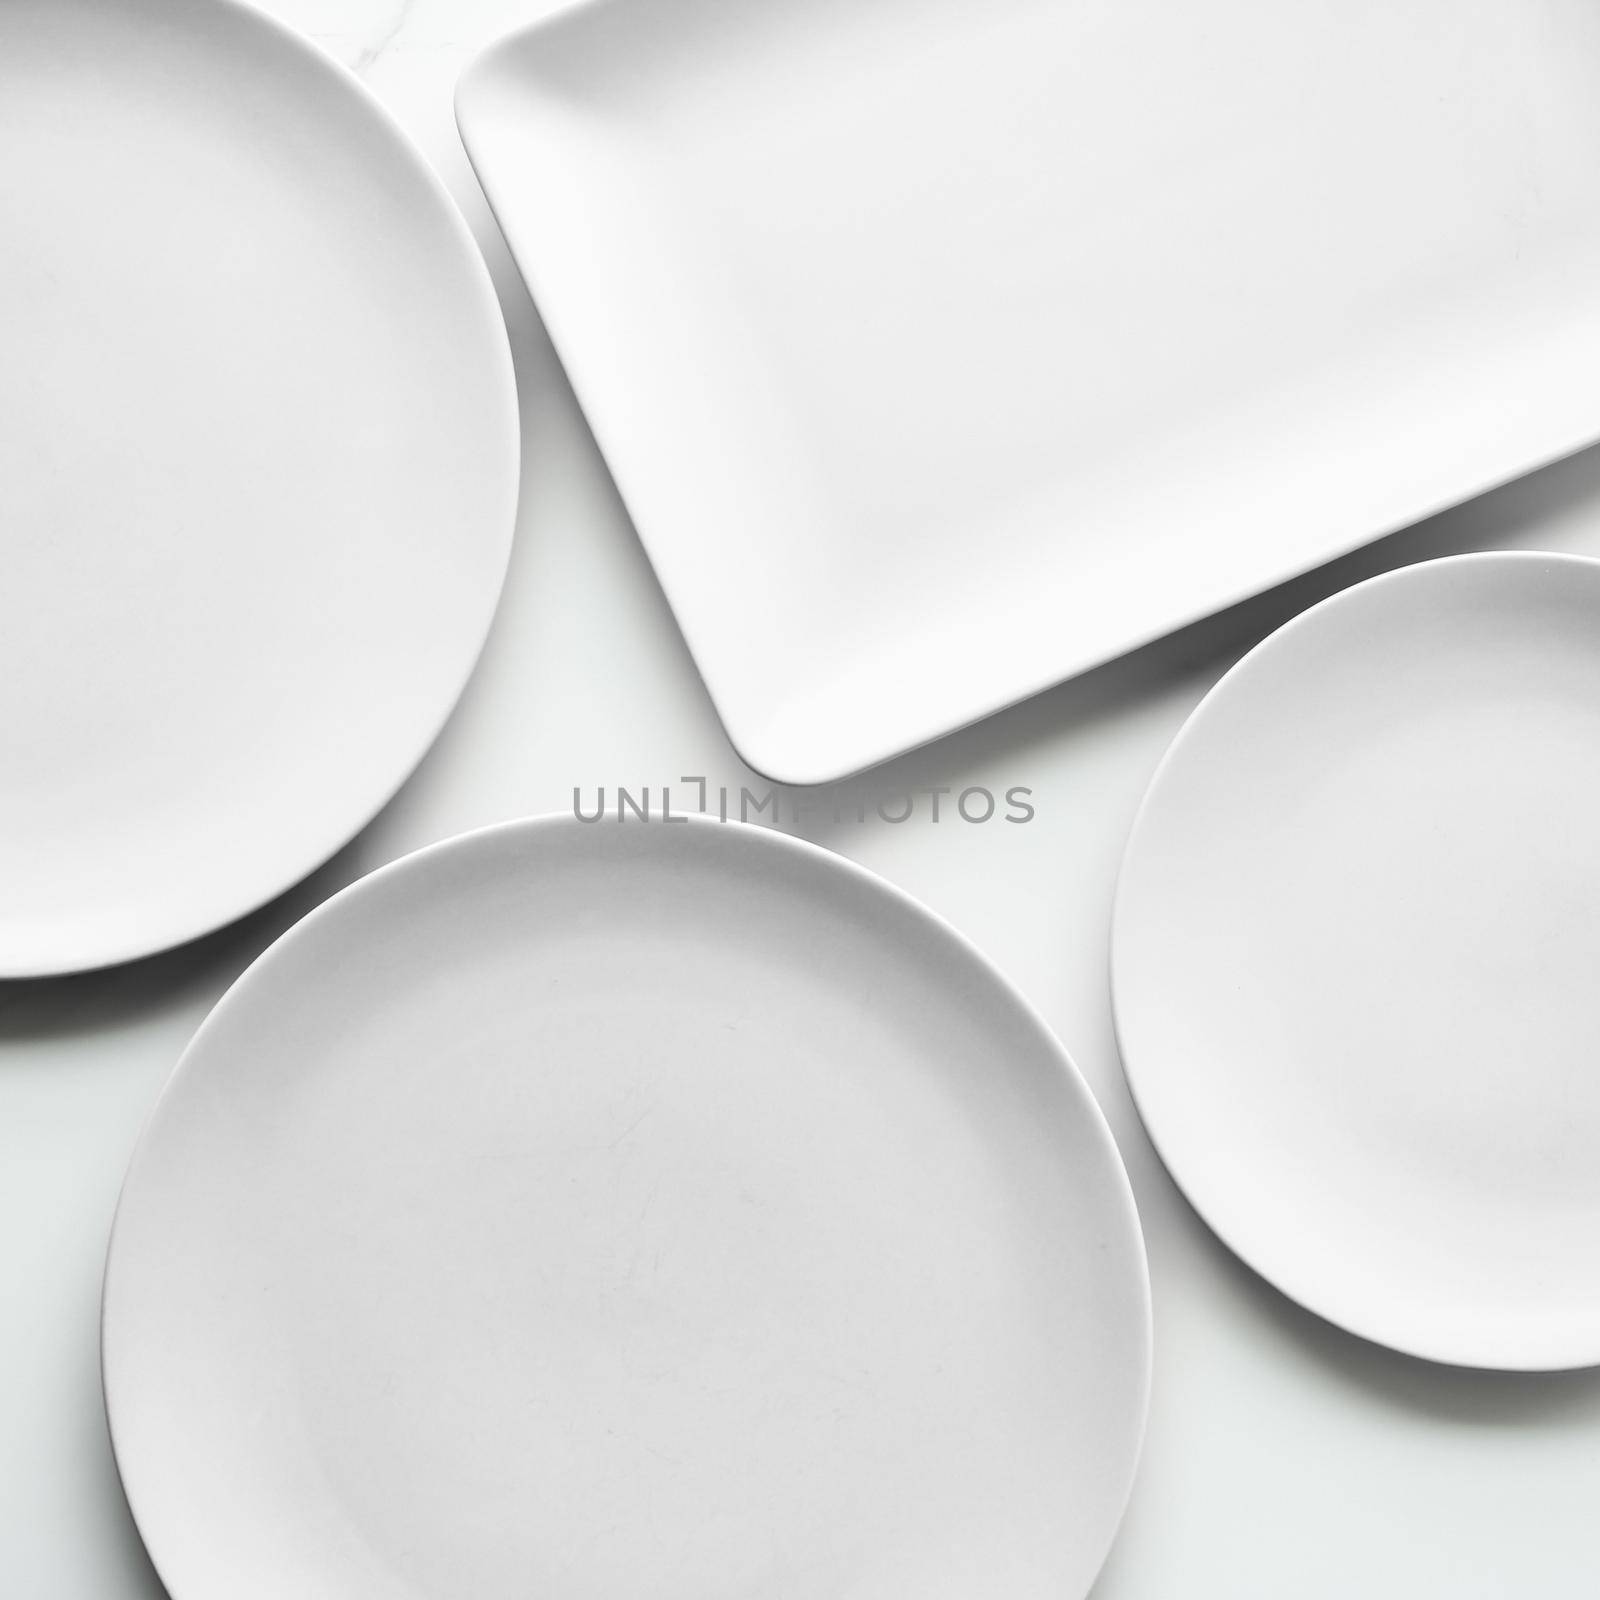 White empty plate on marble, flatlay - stylish tableware, romantic table decor and food menu concept. Serve the perfect dish